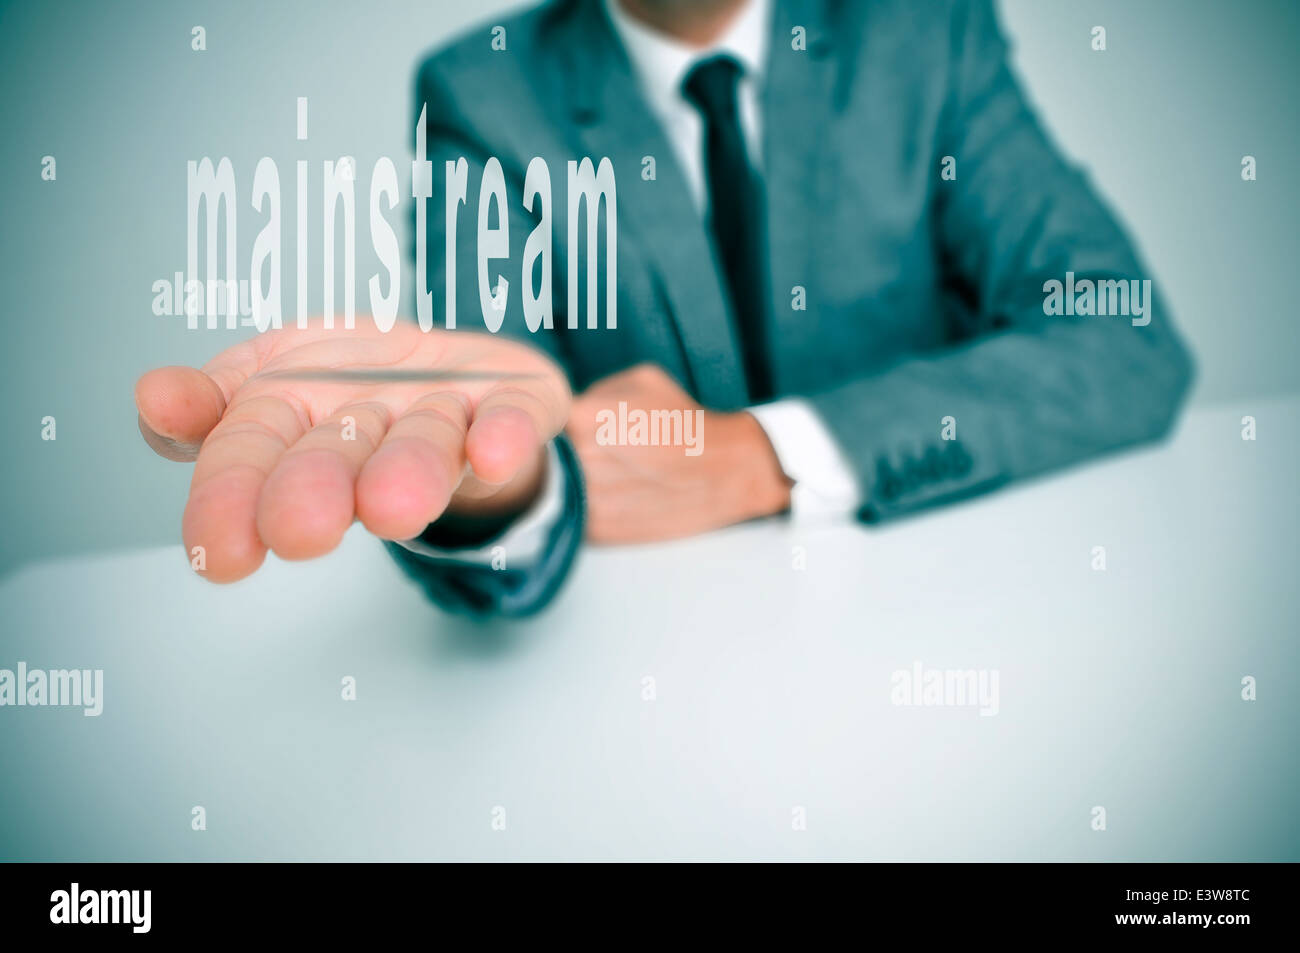 man wearing a suit sitting in a desk holding the word mainstream in his hands Stock Photo